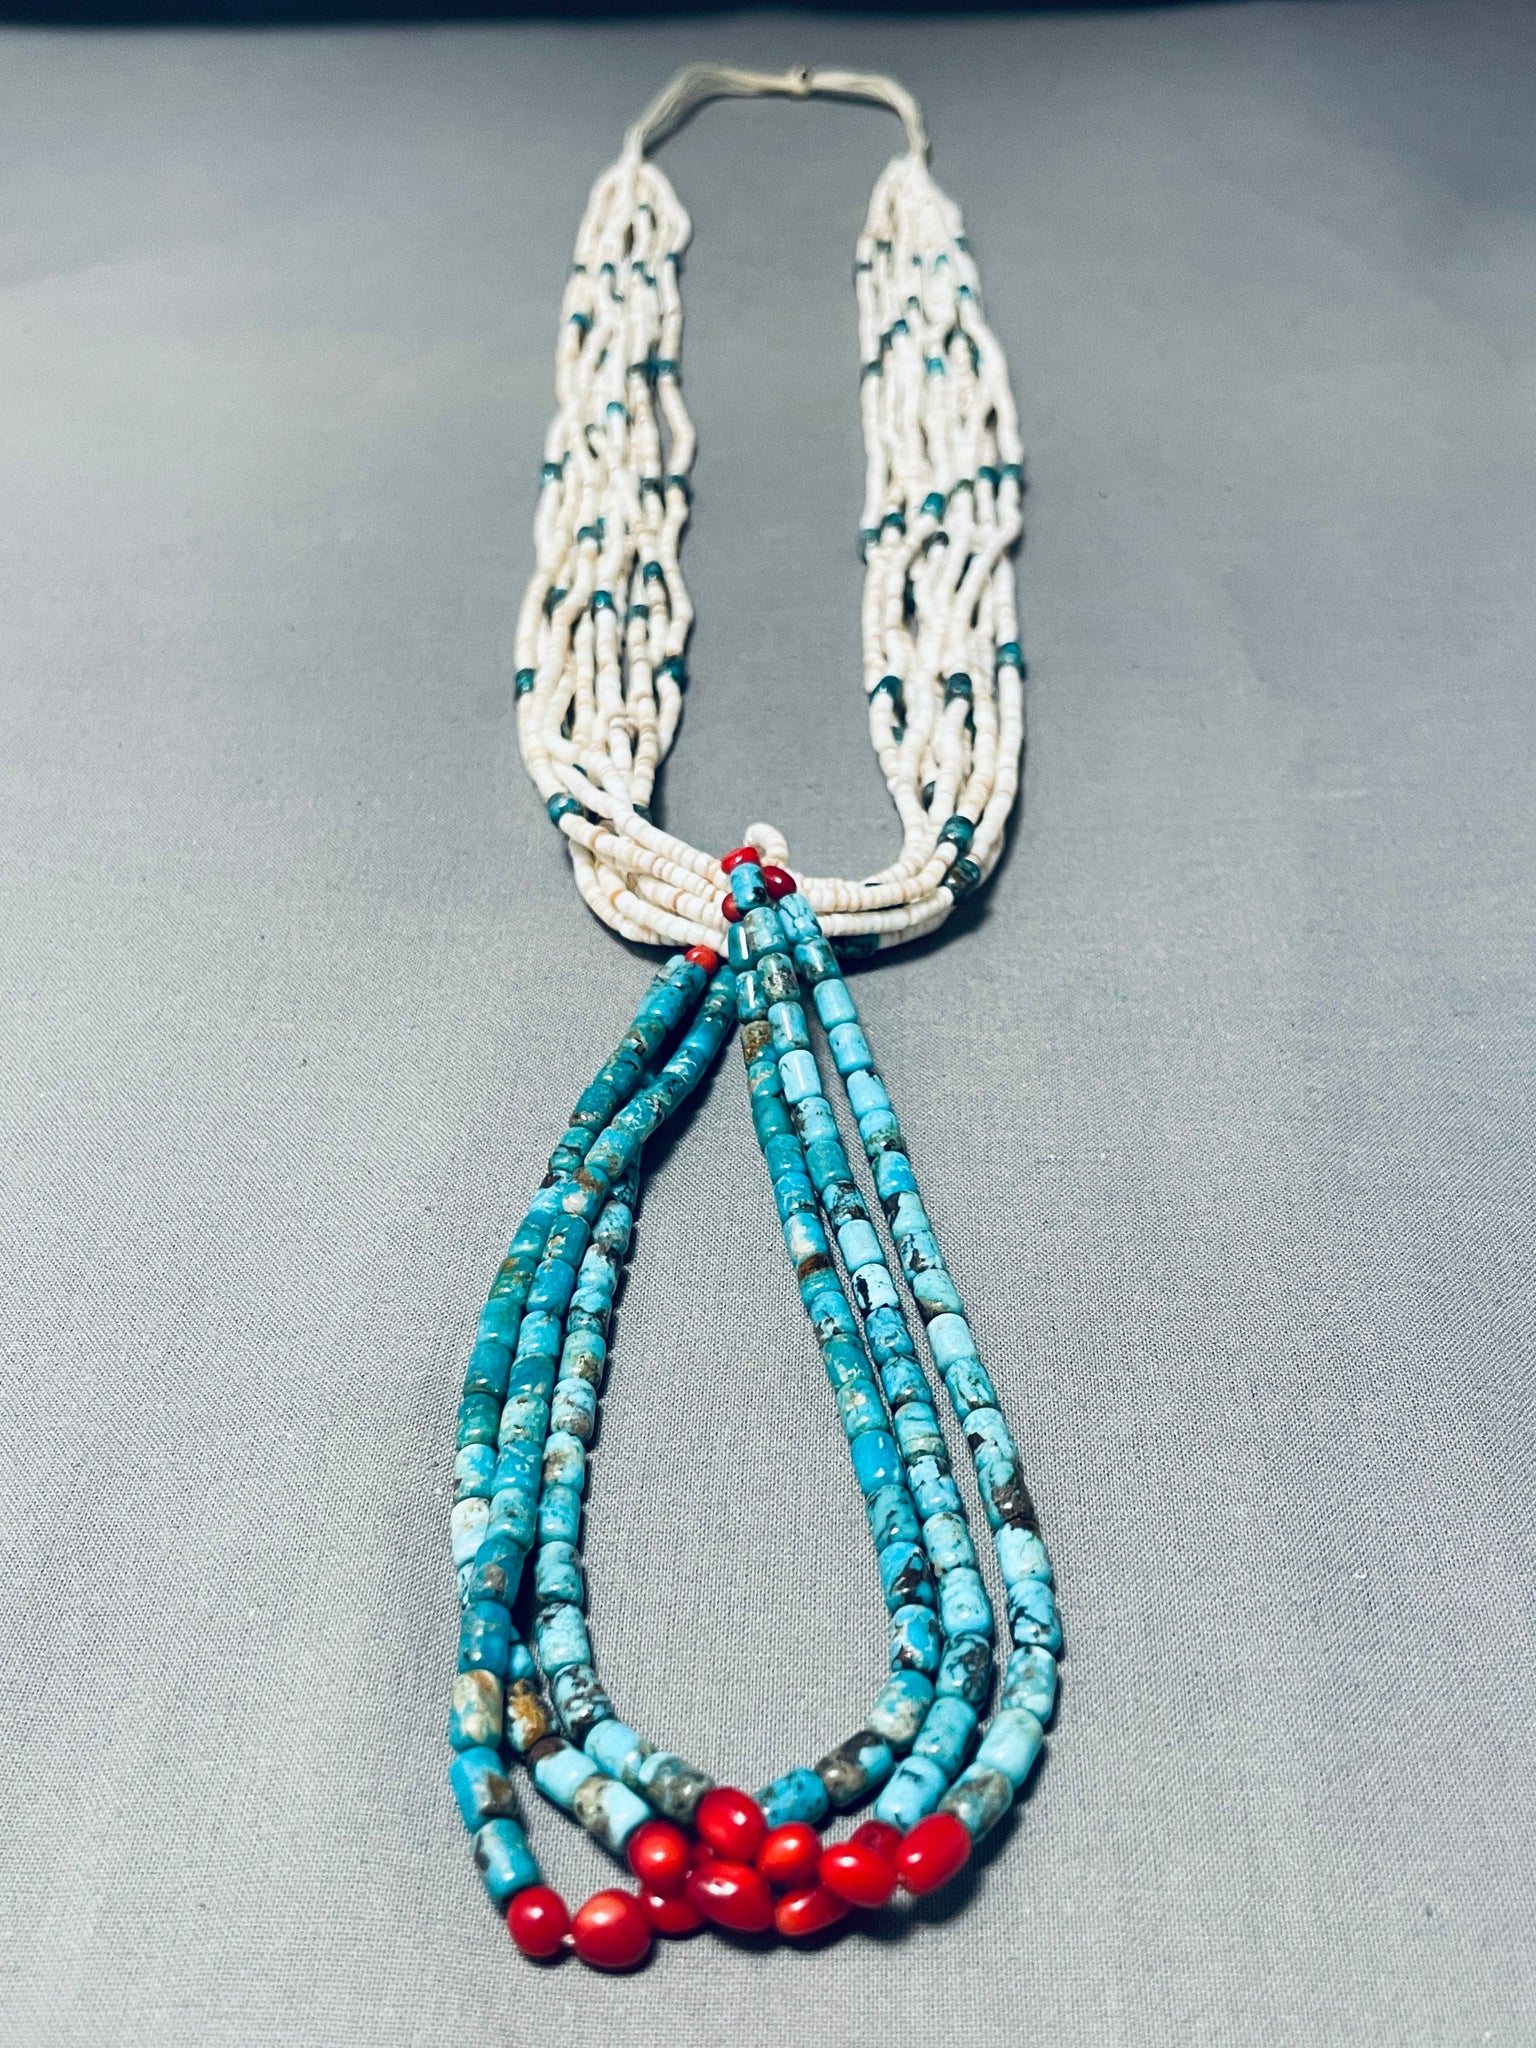 Triangle Silver925 Pendant with Coral & Turquoise Beads Necklace